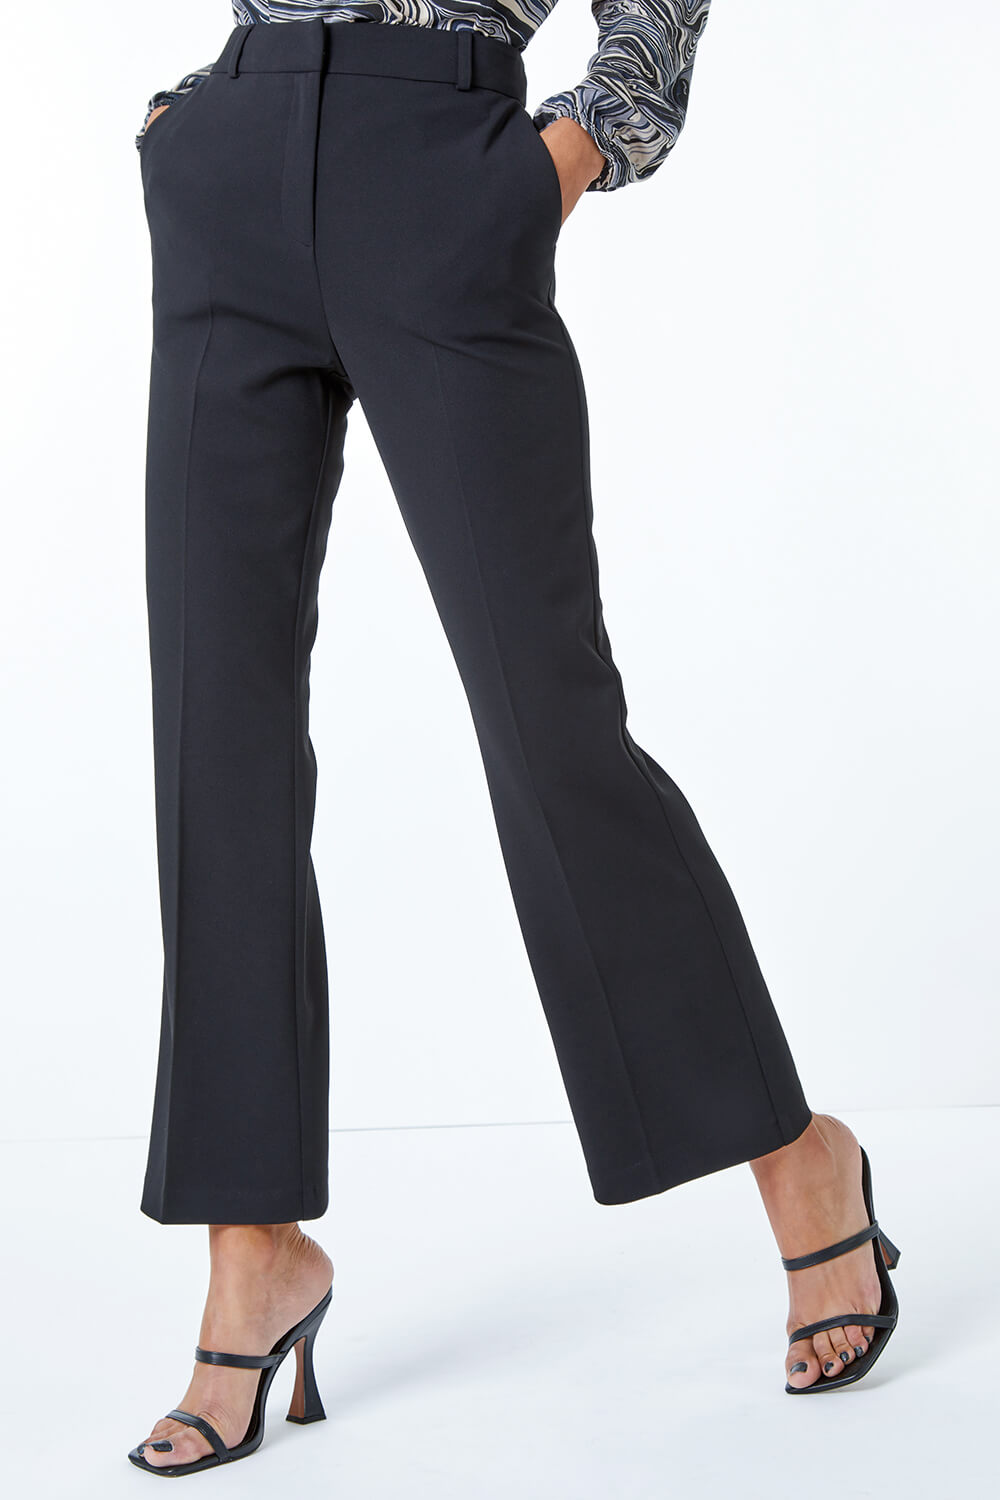 Black Bootcut Leg Stretch Trousers, Image 5 of 5